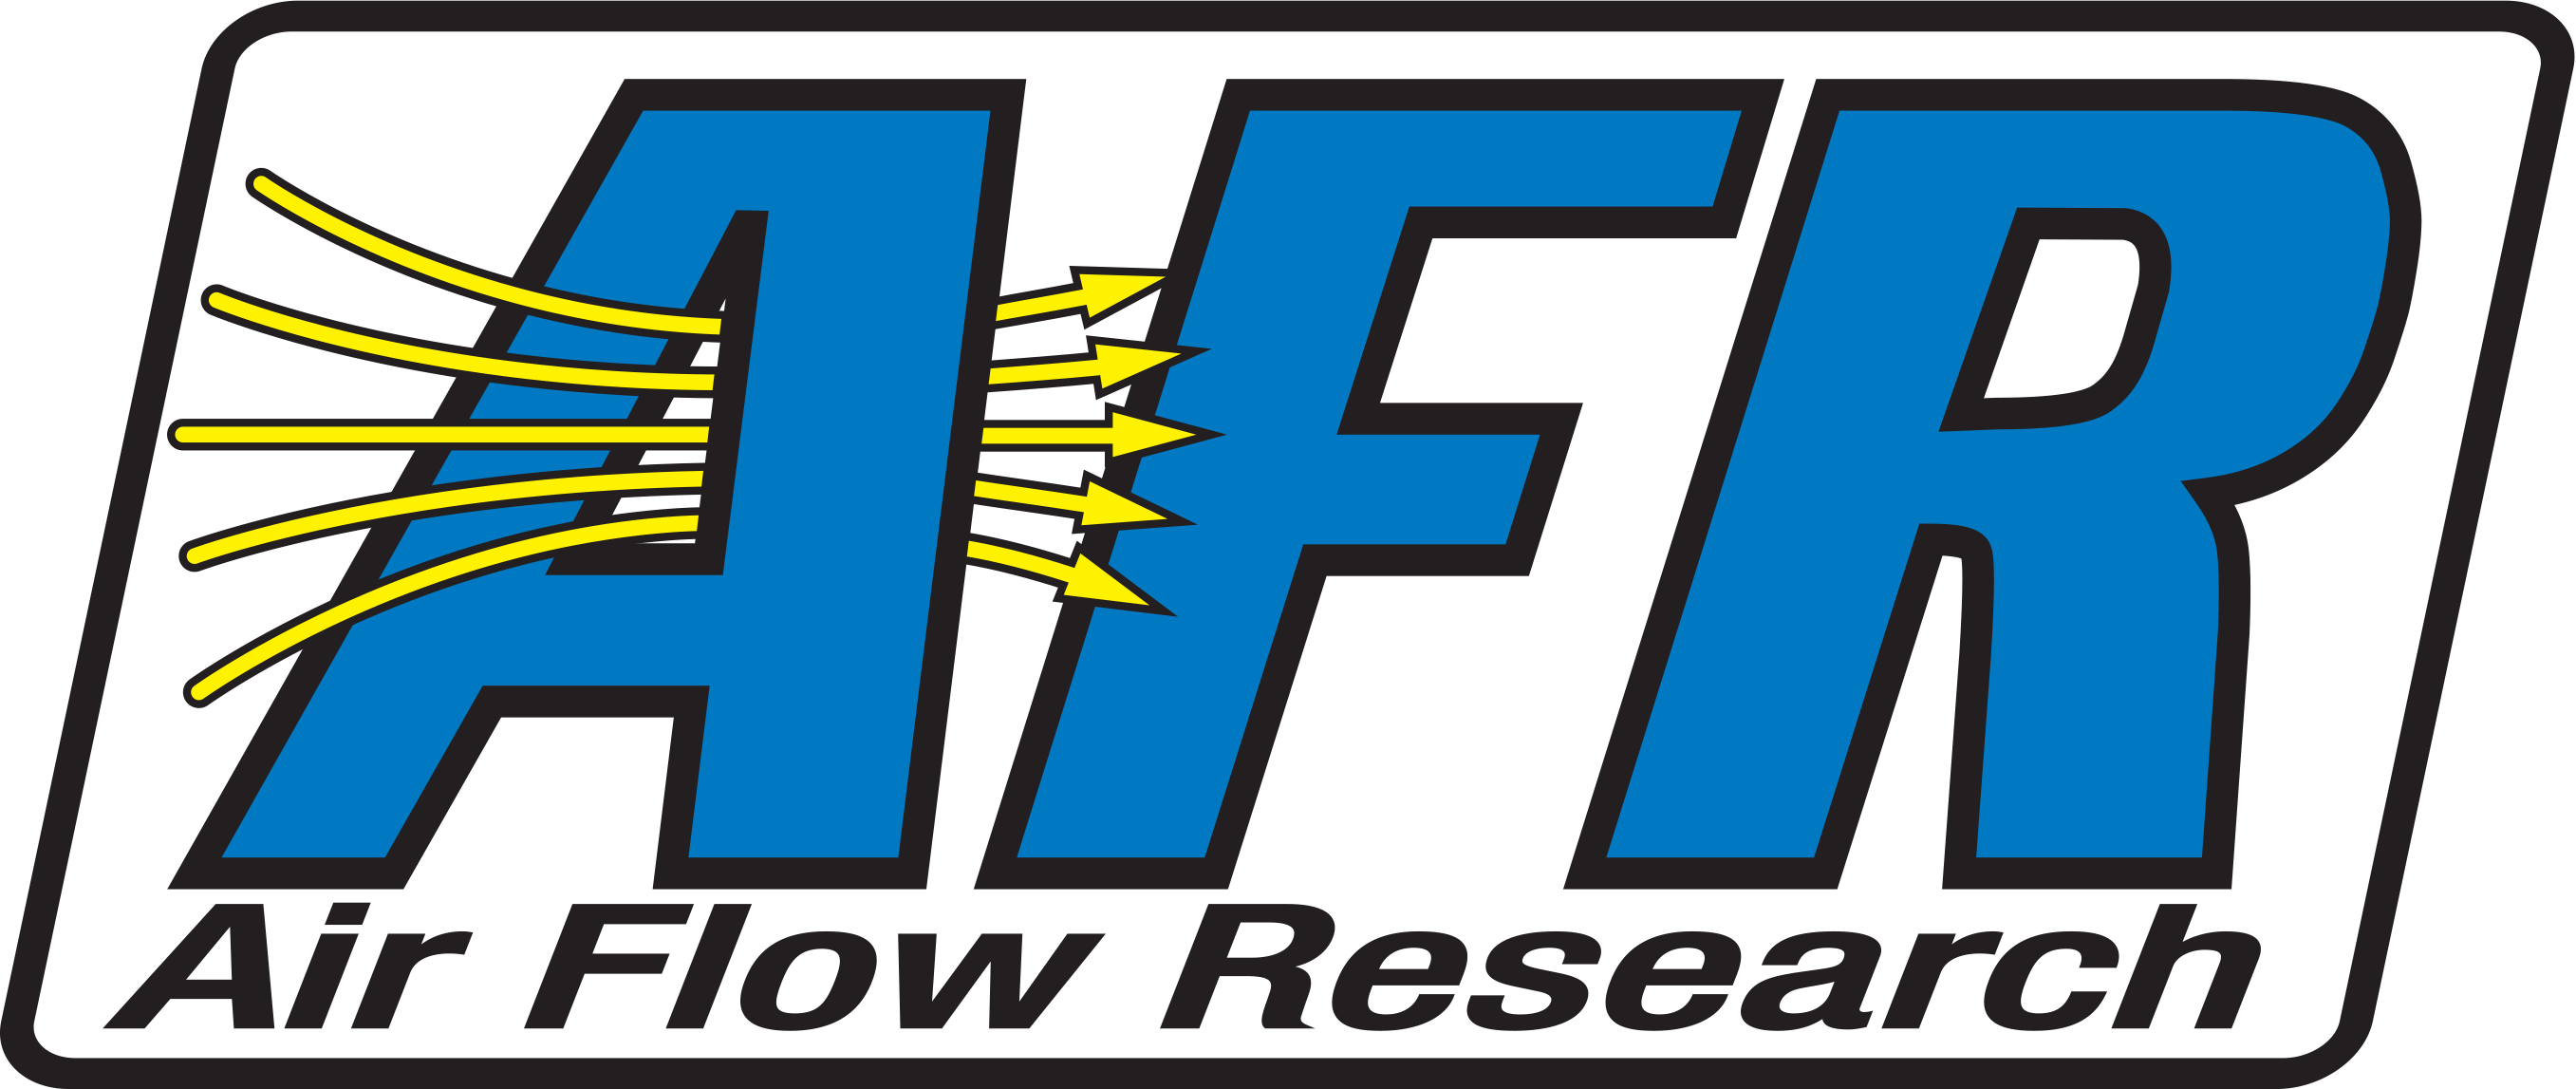 Air Flow Research (9701) Apparel/Promotional